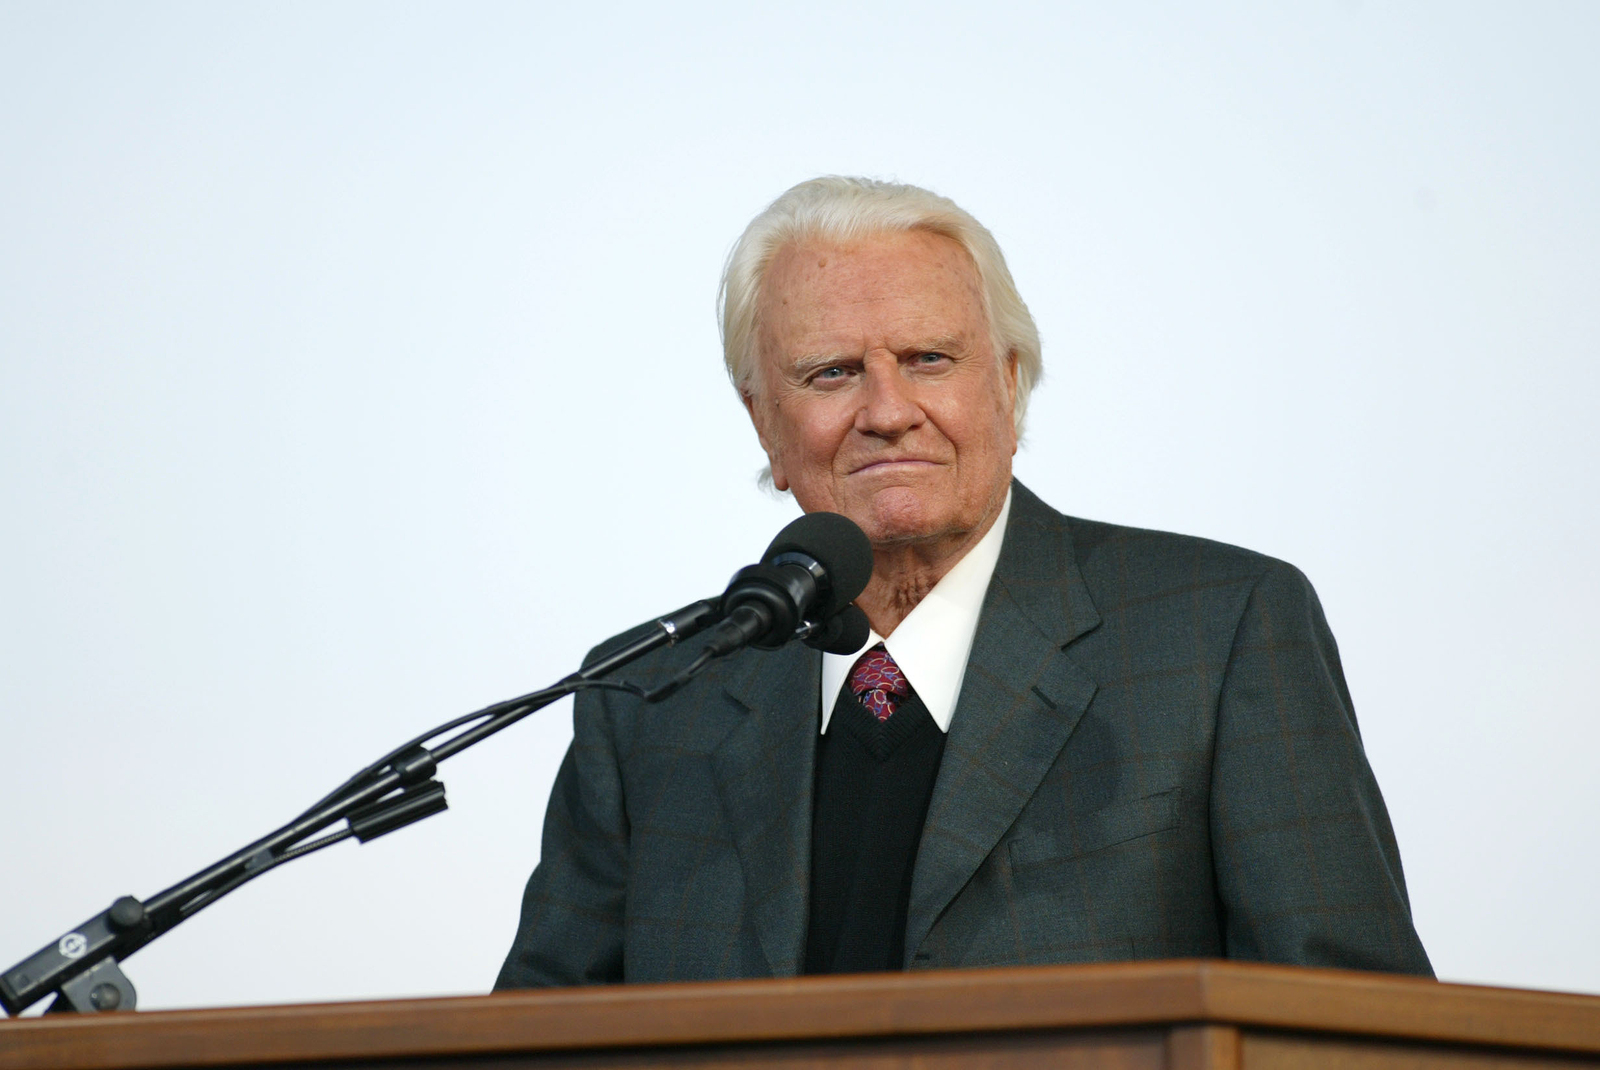 The Billy Graham Rule and #MeToo